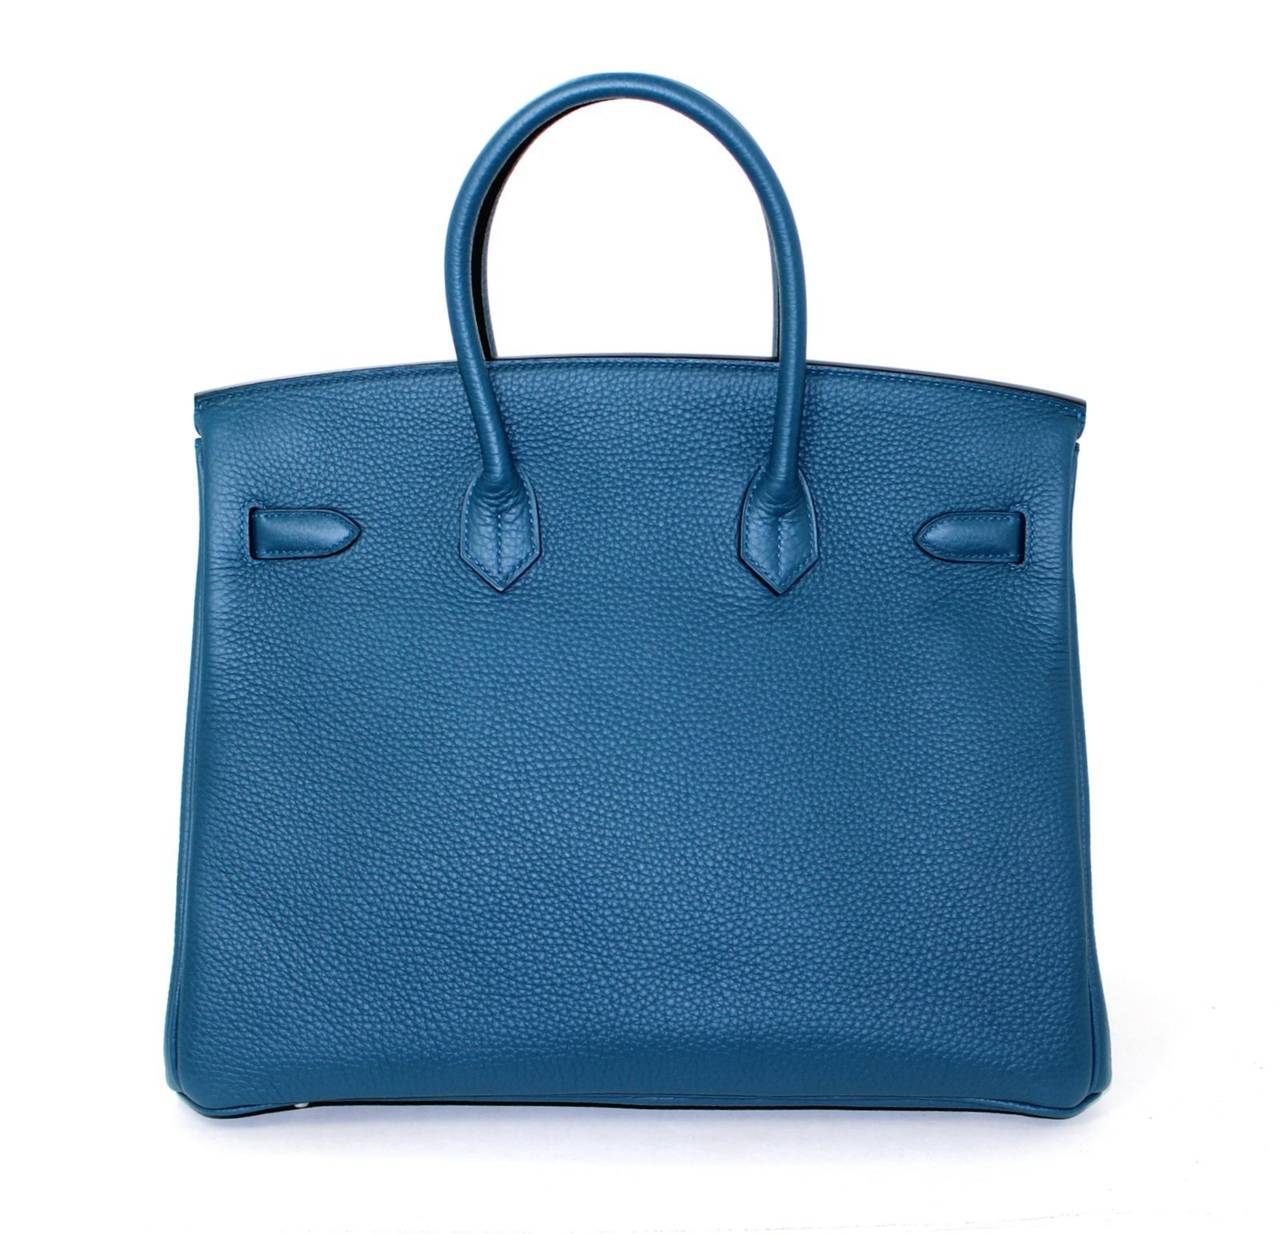 Pristine, new and never carried Hermès Birkin Bag in Blue Colvert Togo Leather, 35 cm size.   Crafted by hand and considered by many as the epitome of luxury items, Birkins are extremely difficult to get. Scratch resistant and richly textured, Blue